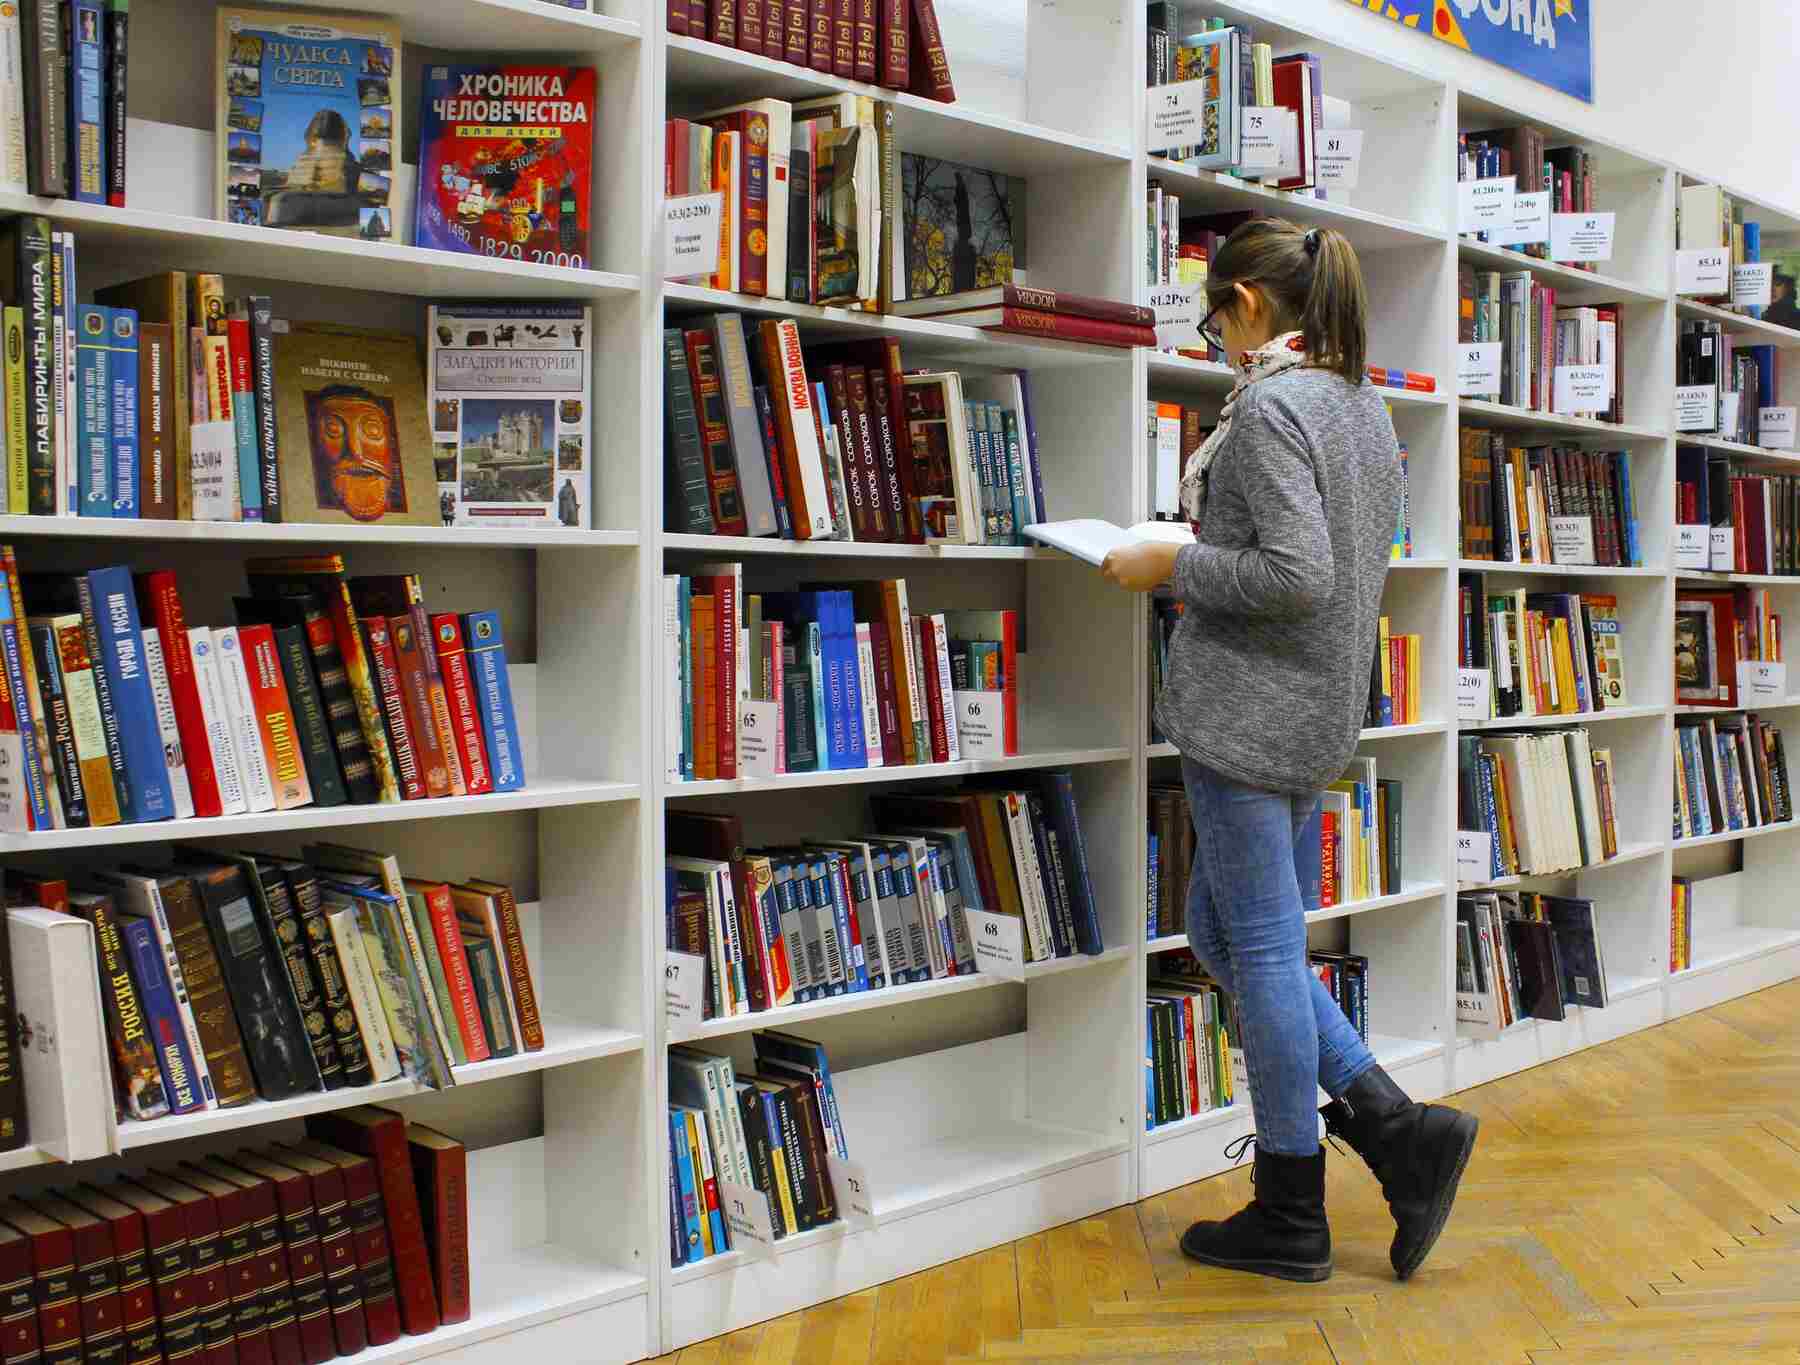 Woman reading a book in front of a library shelf